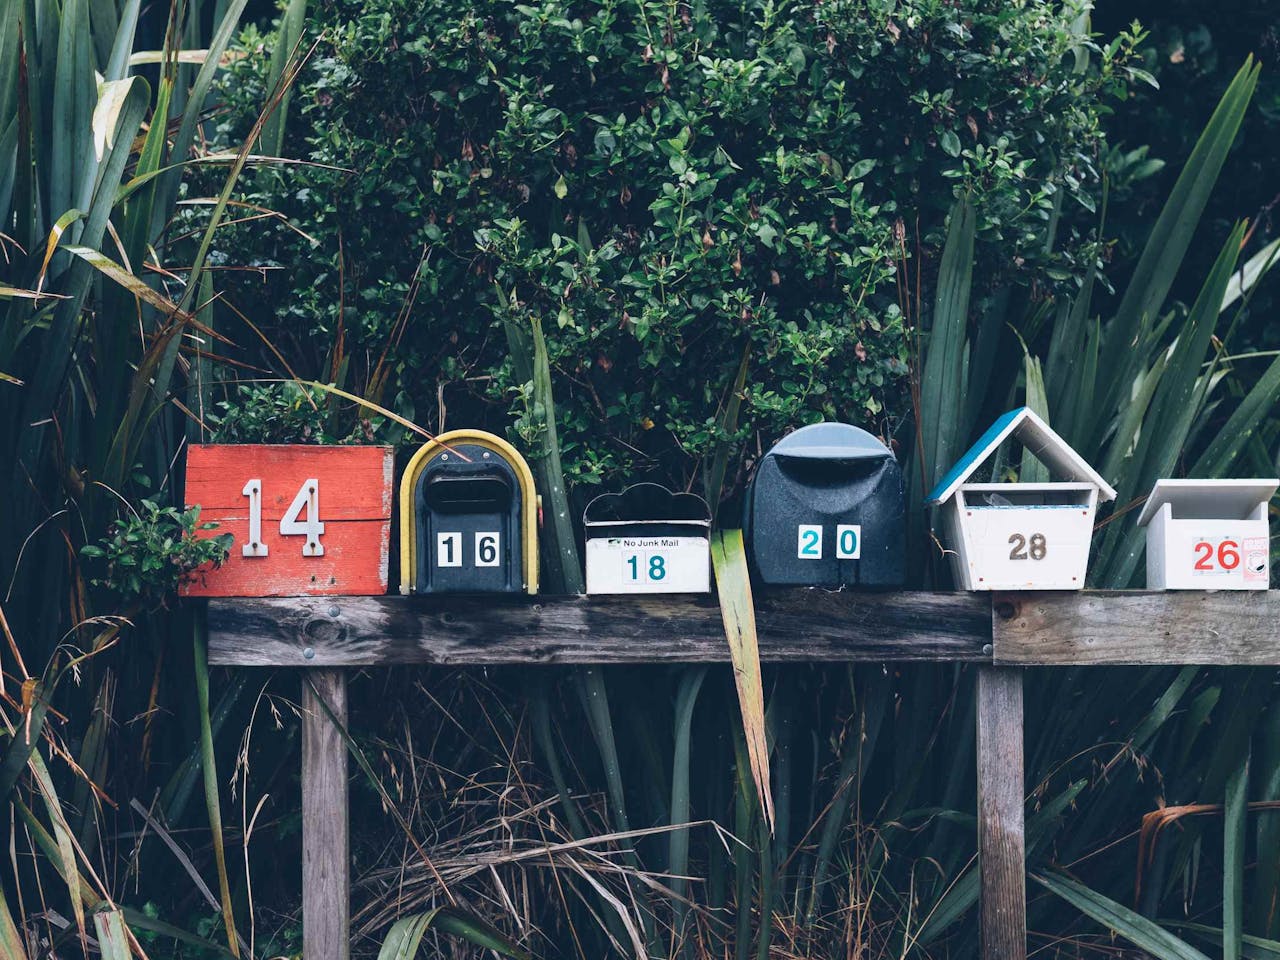 Mailboxes
